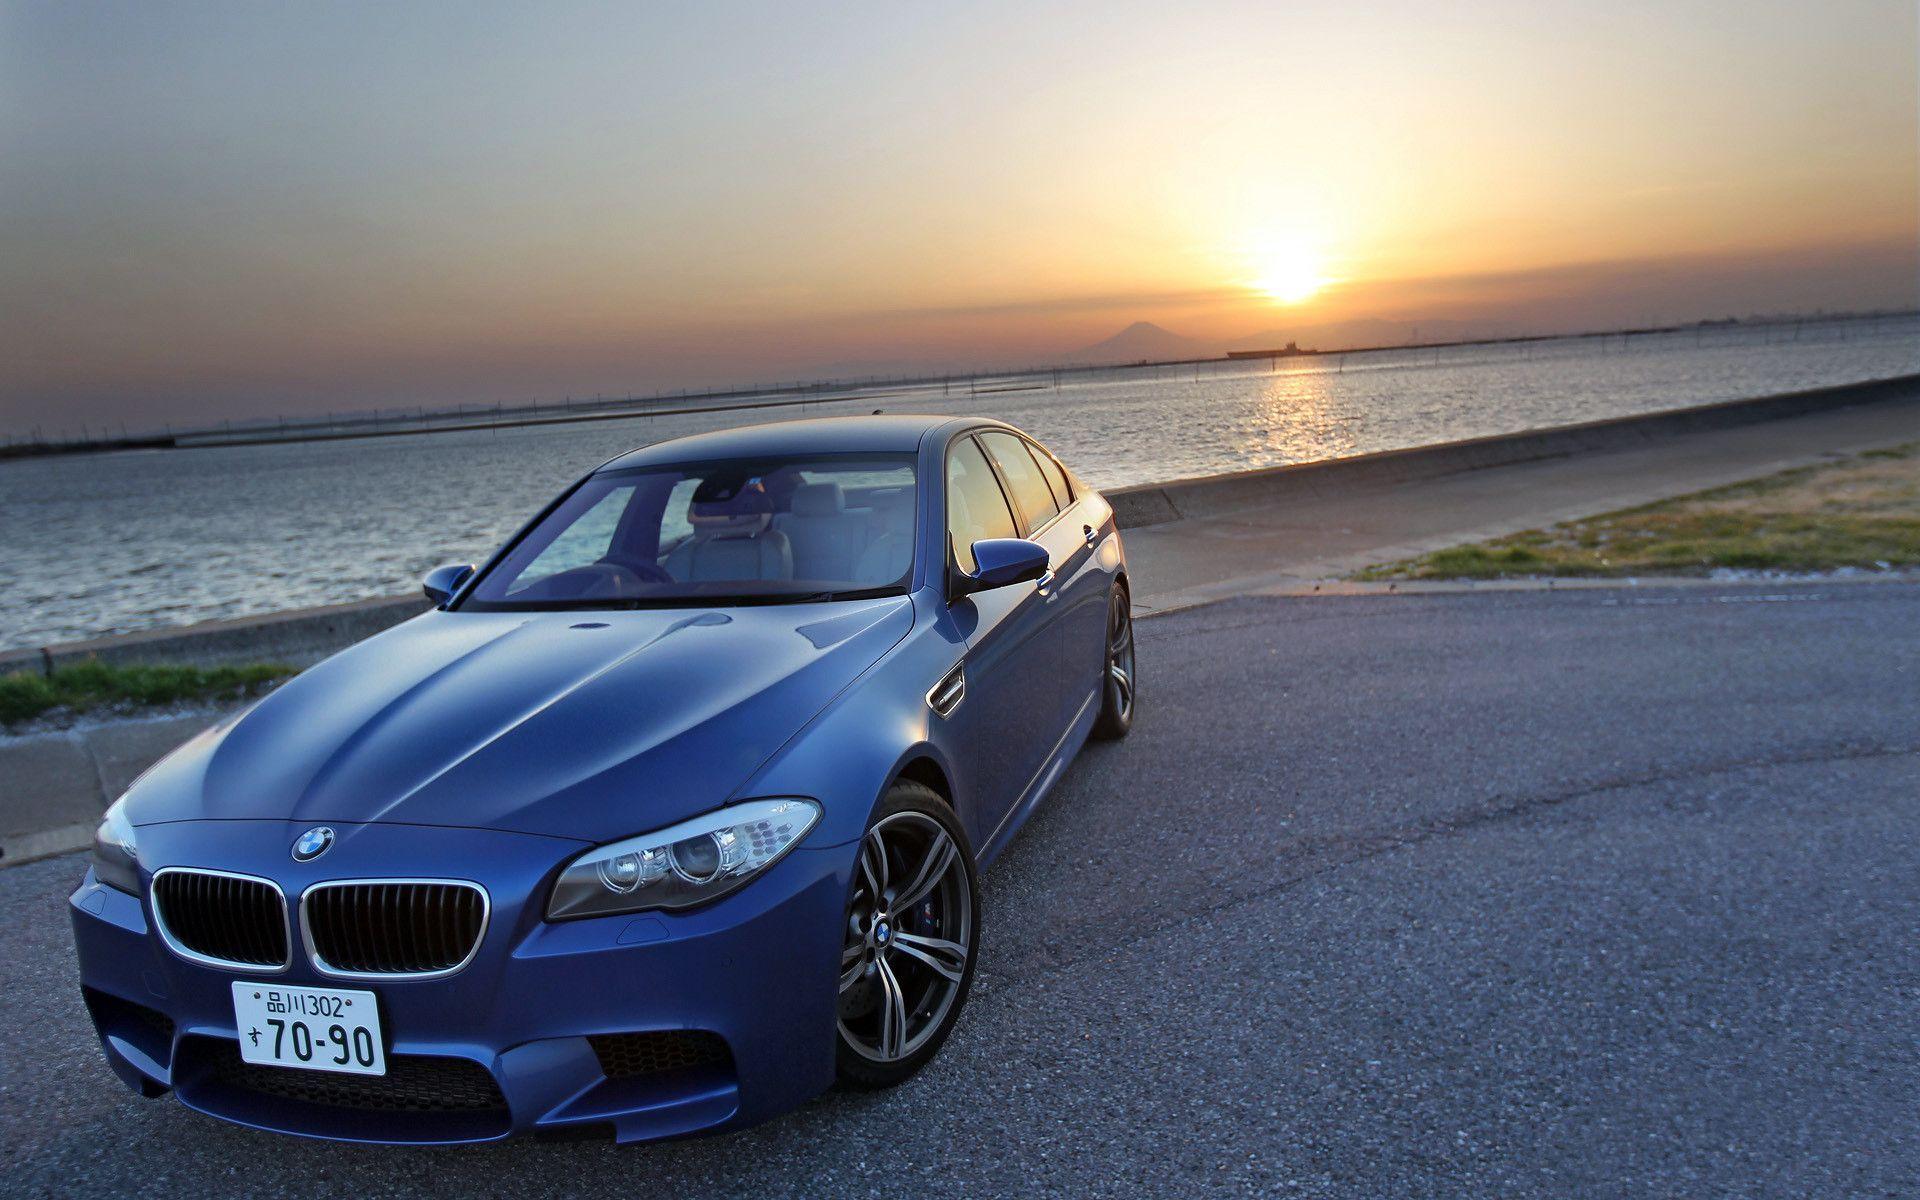 2012 Bmw M5 Wallpapers